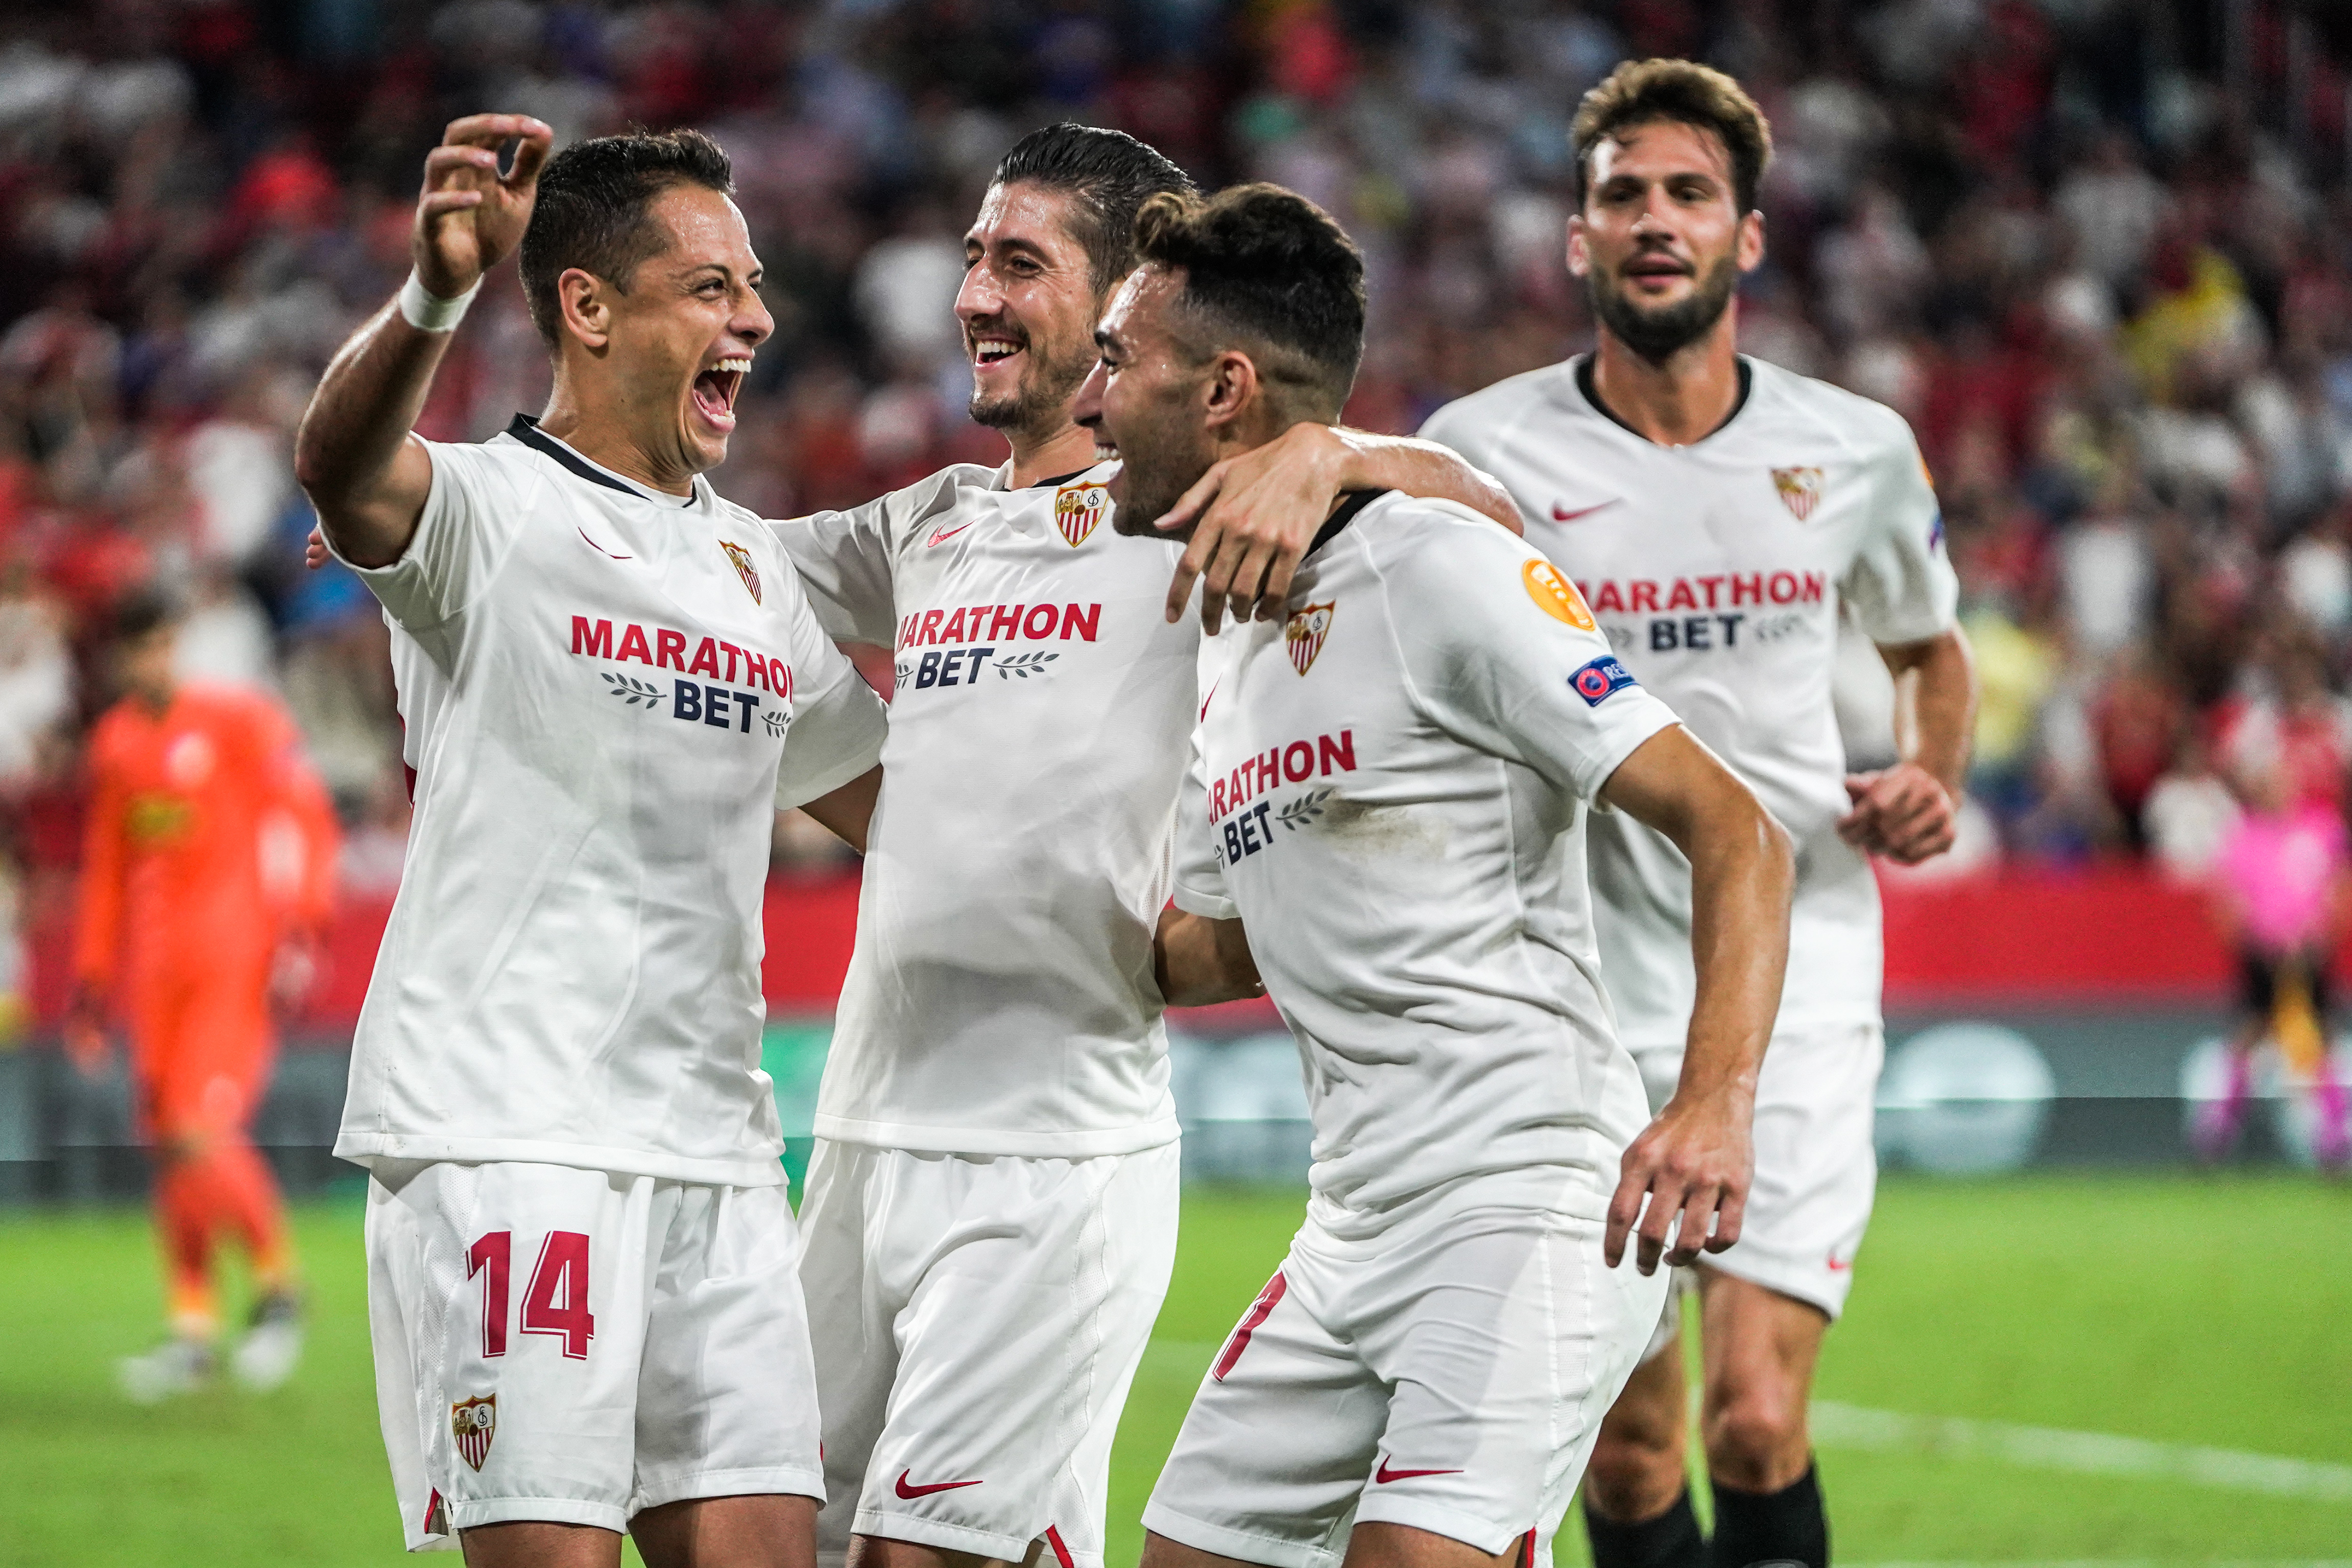 Sevilla FC unbeaten in 7 out of their first 10 games - Sevilla FC